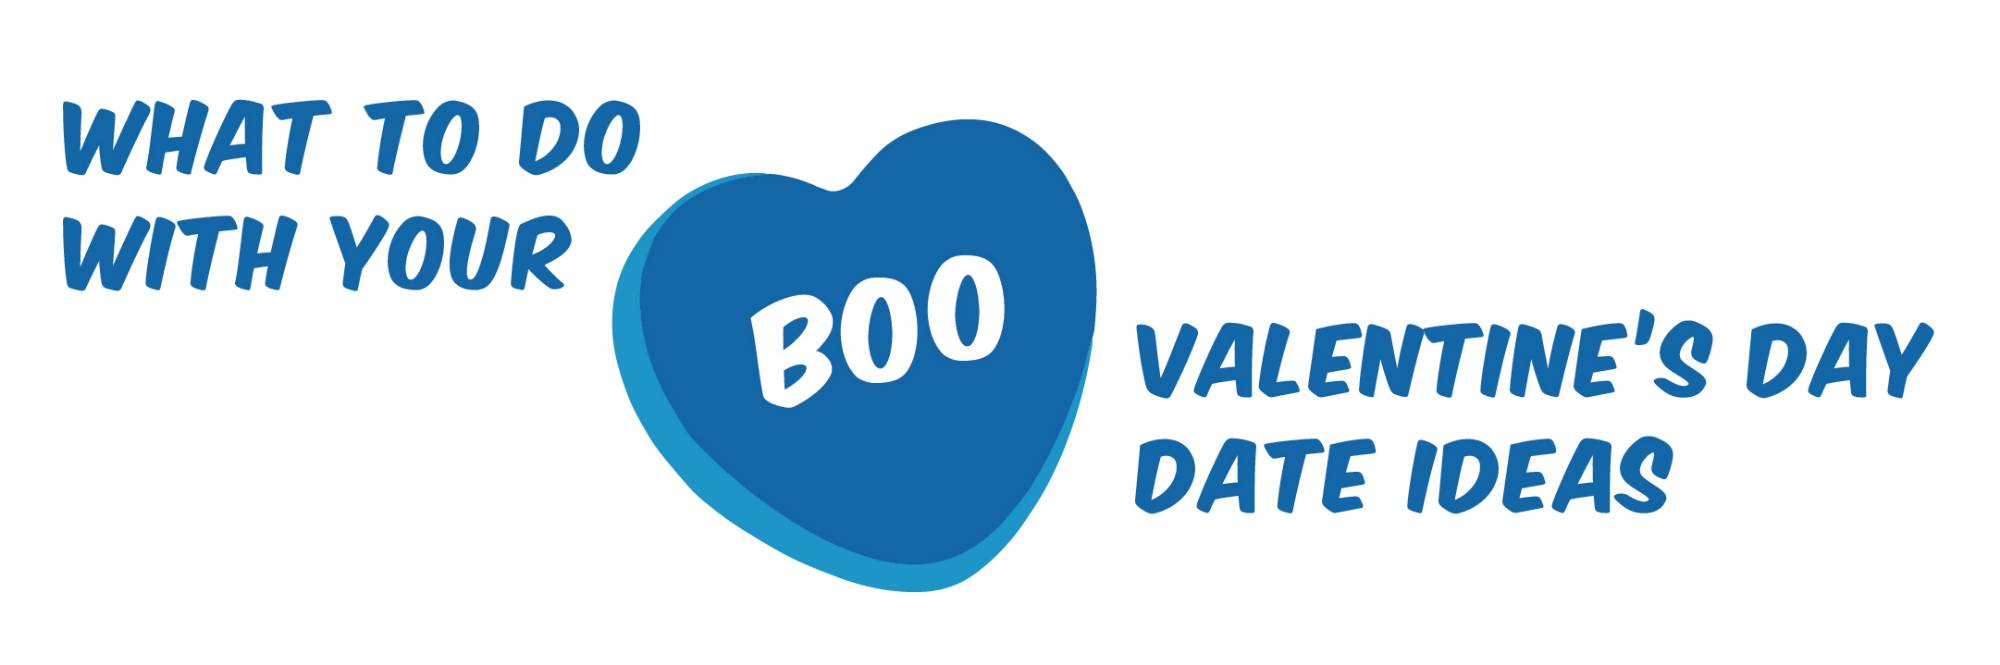 What to do with your boo: Valentine's Day Date Ideas with a graphic of a blue candy heart